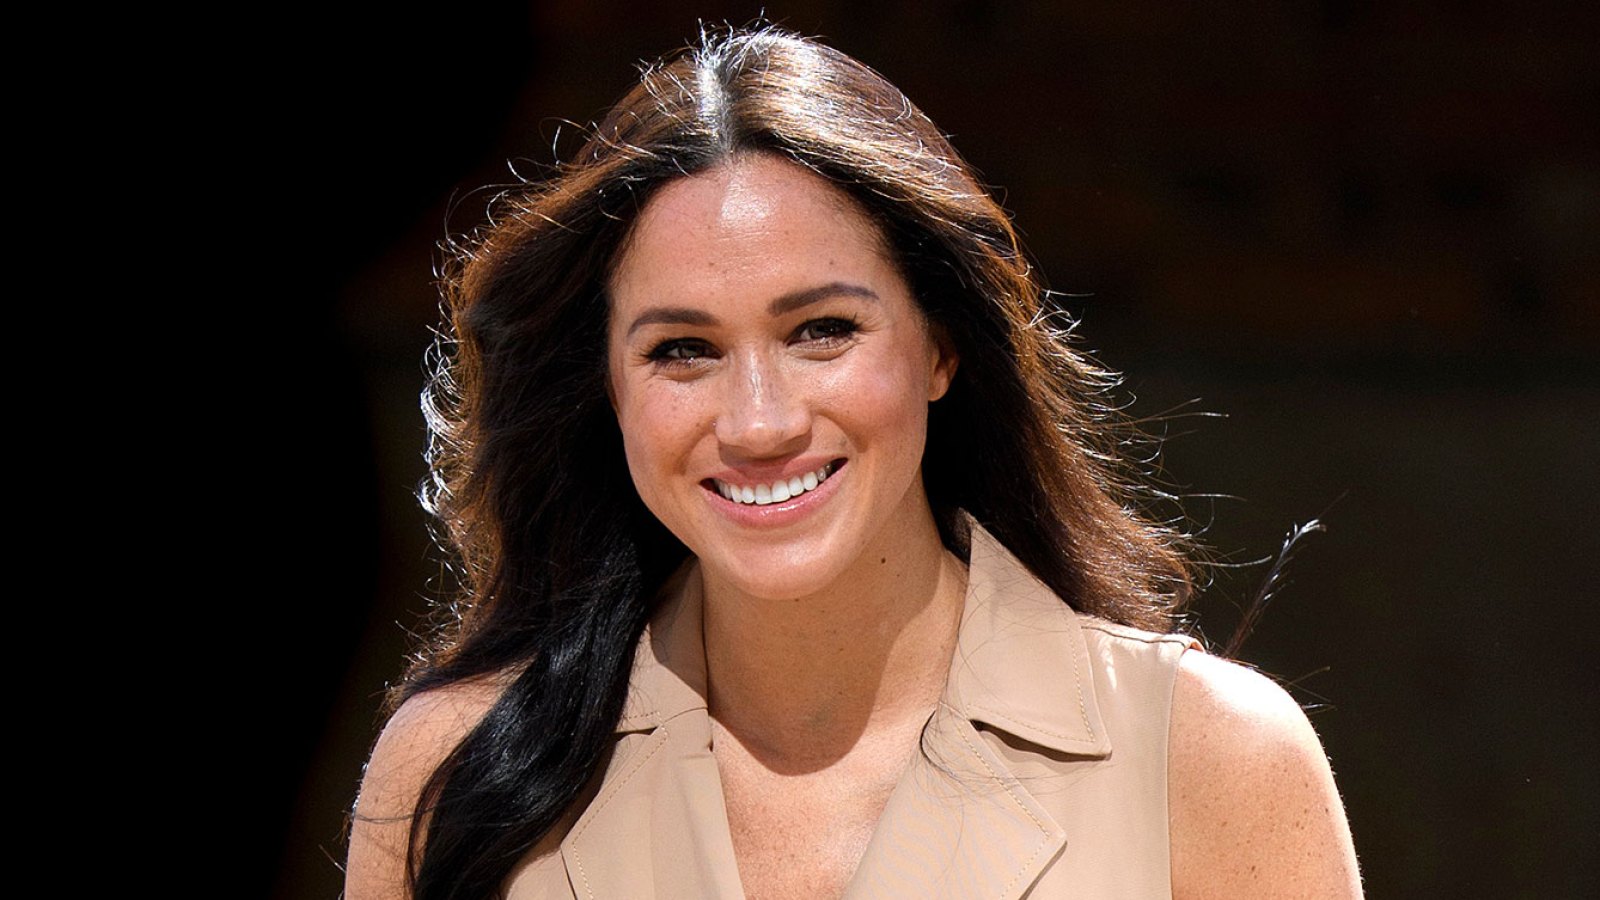 Meghan Markle Using Her Voice